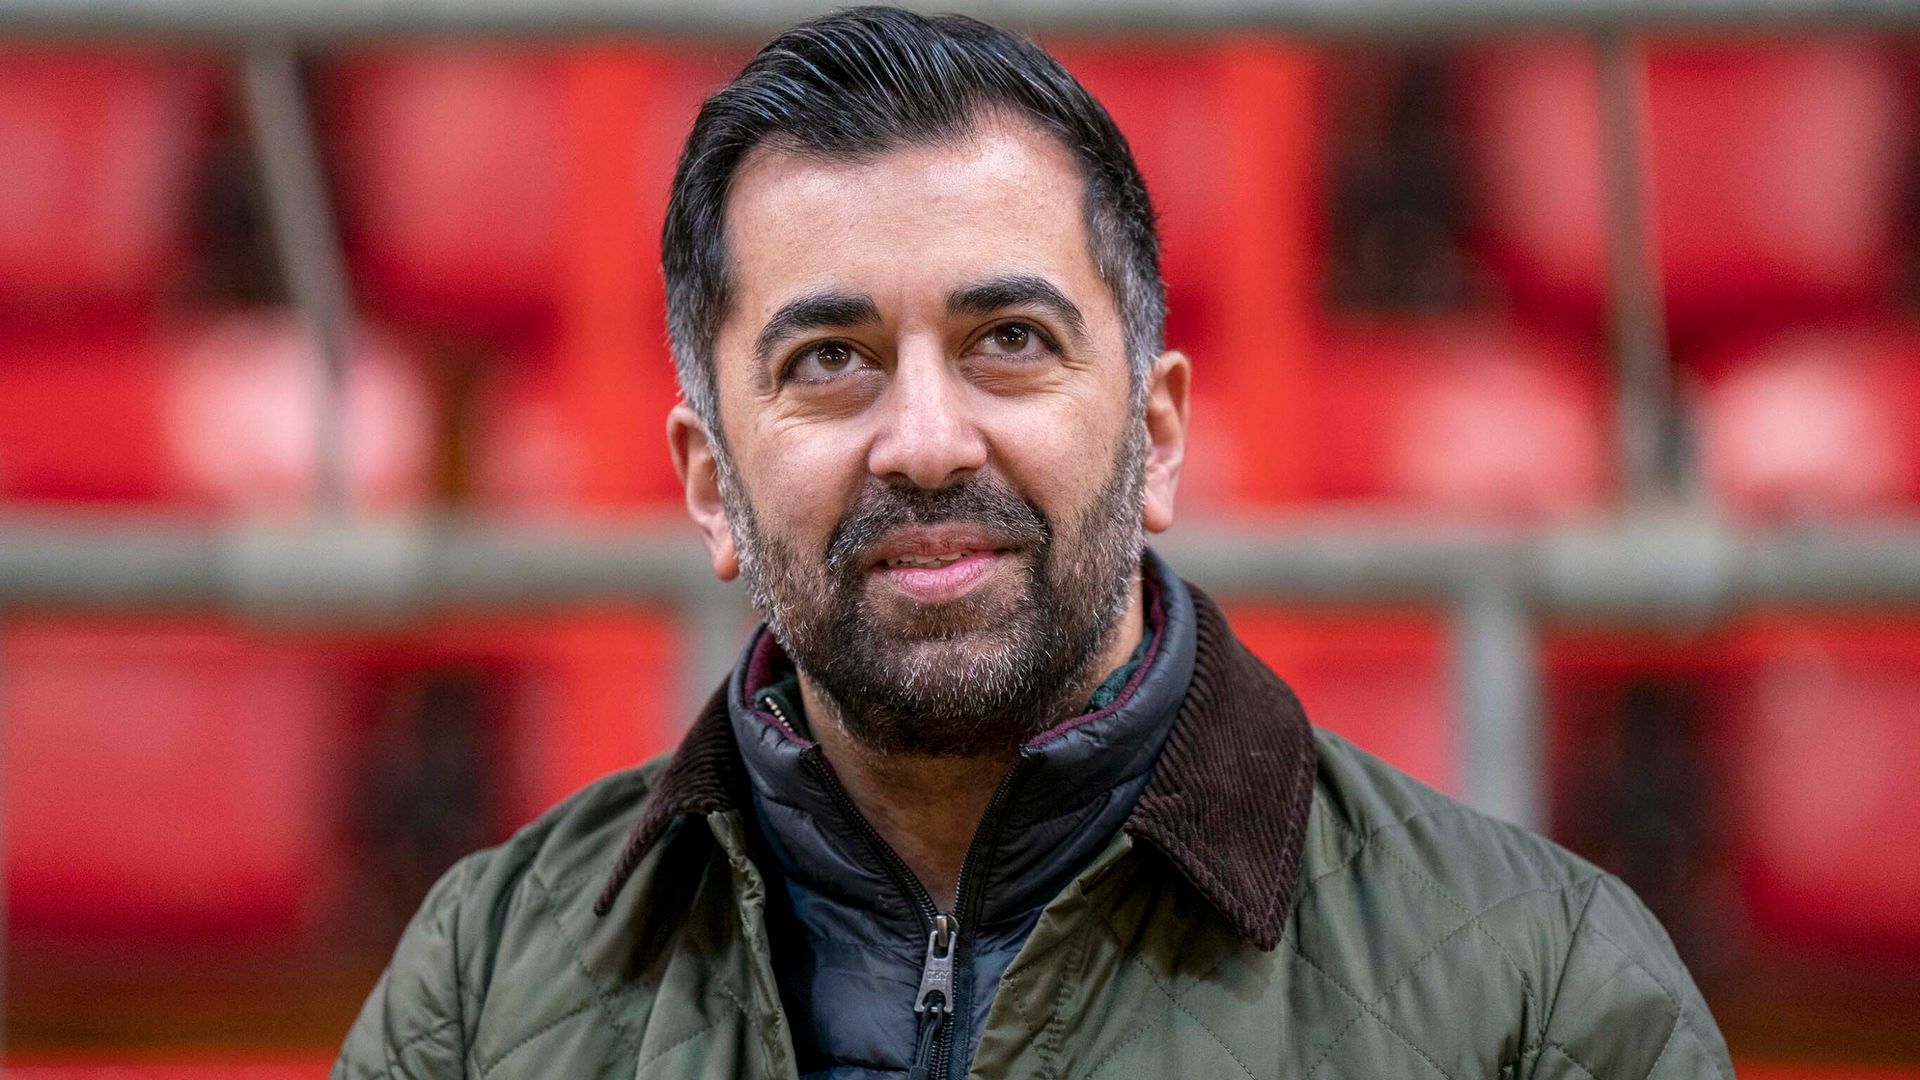 Humza Yousaf to reject pact with Alex Salmond's Alba Party - despite it holding key to his fate